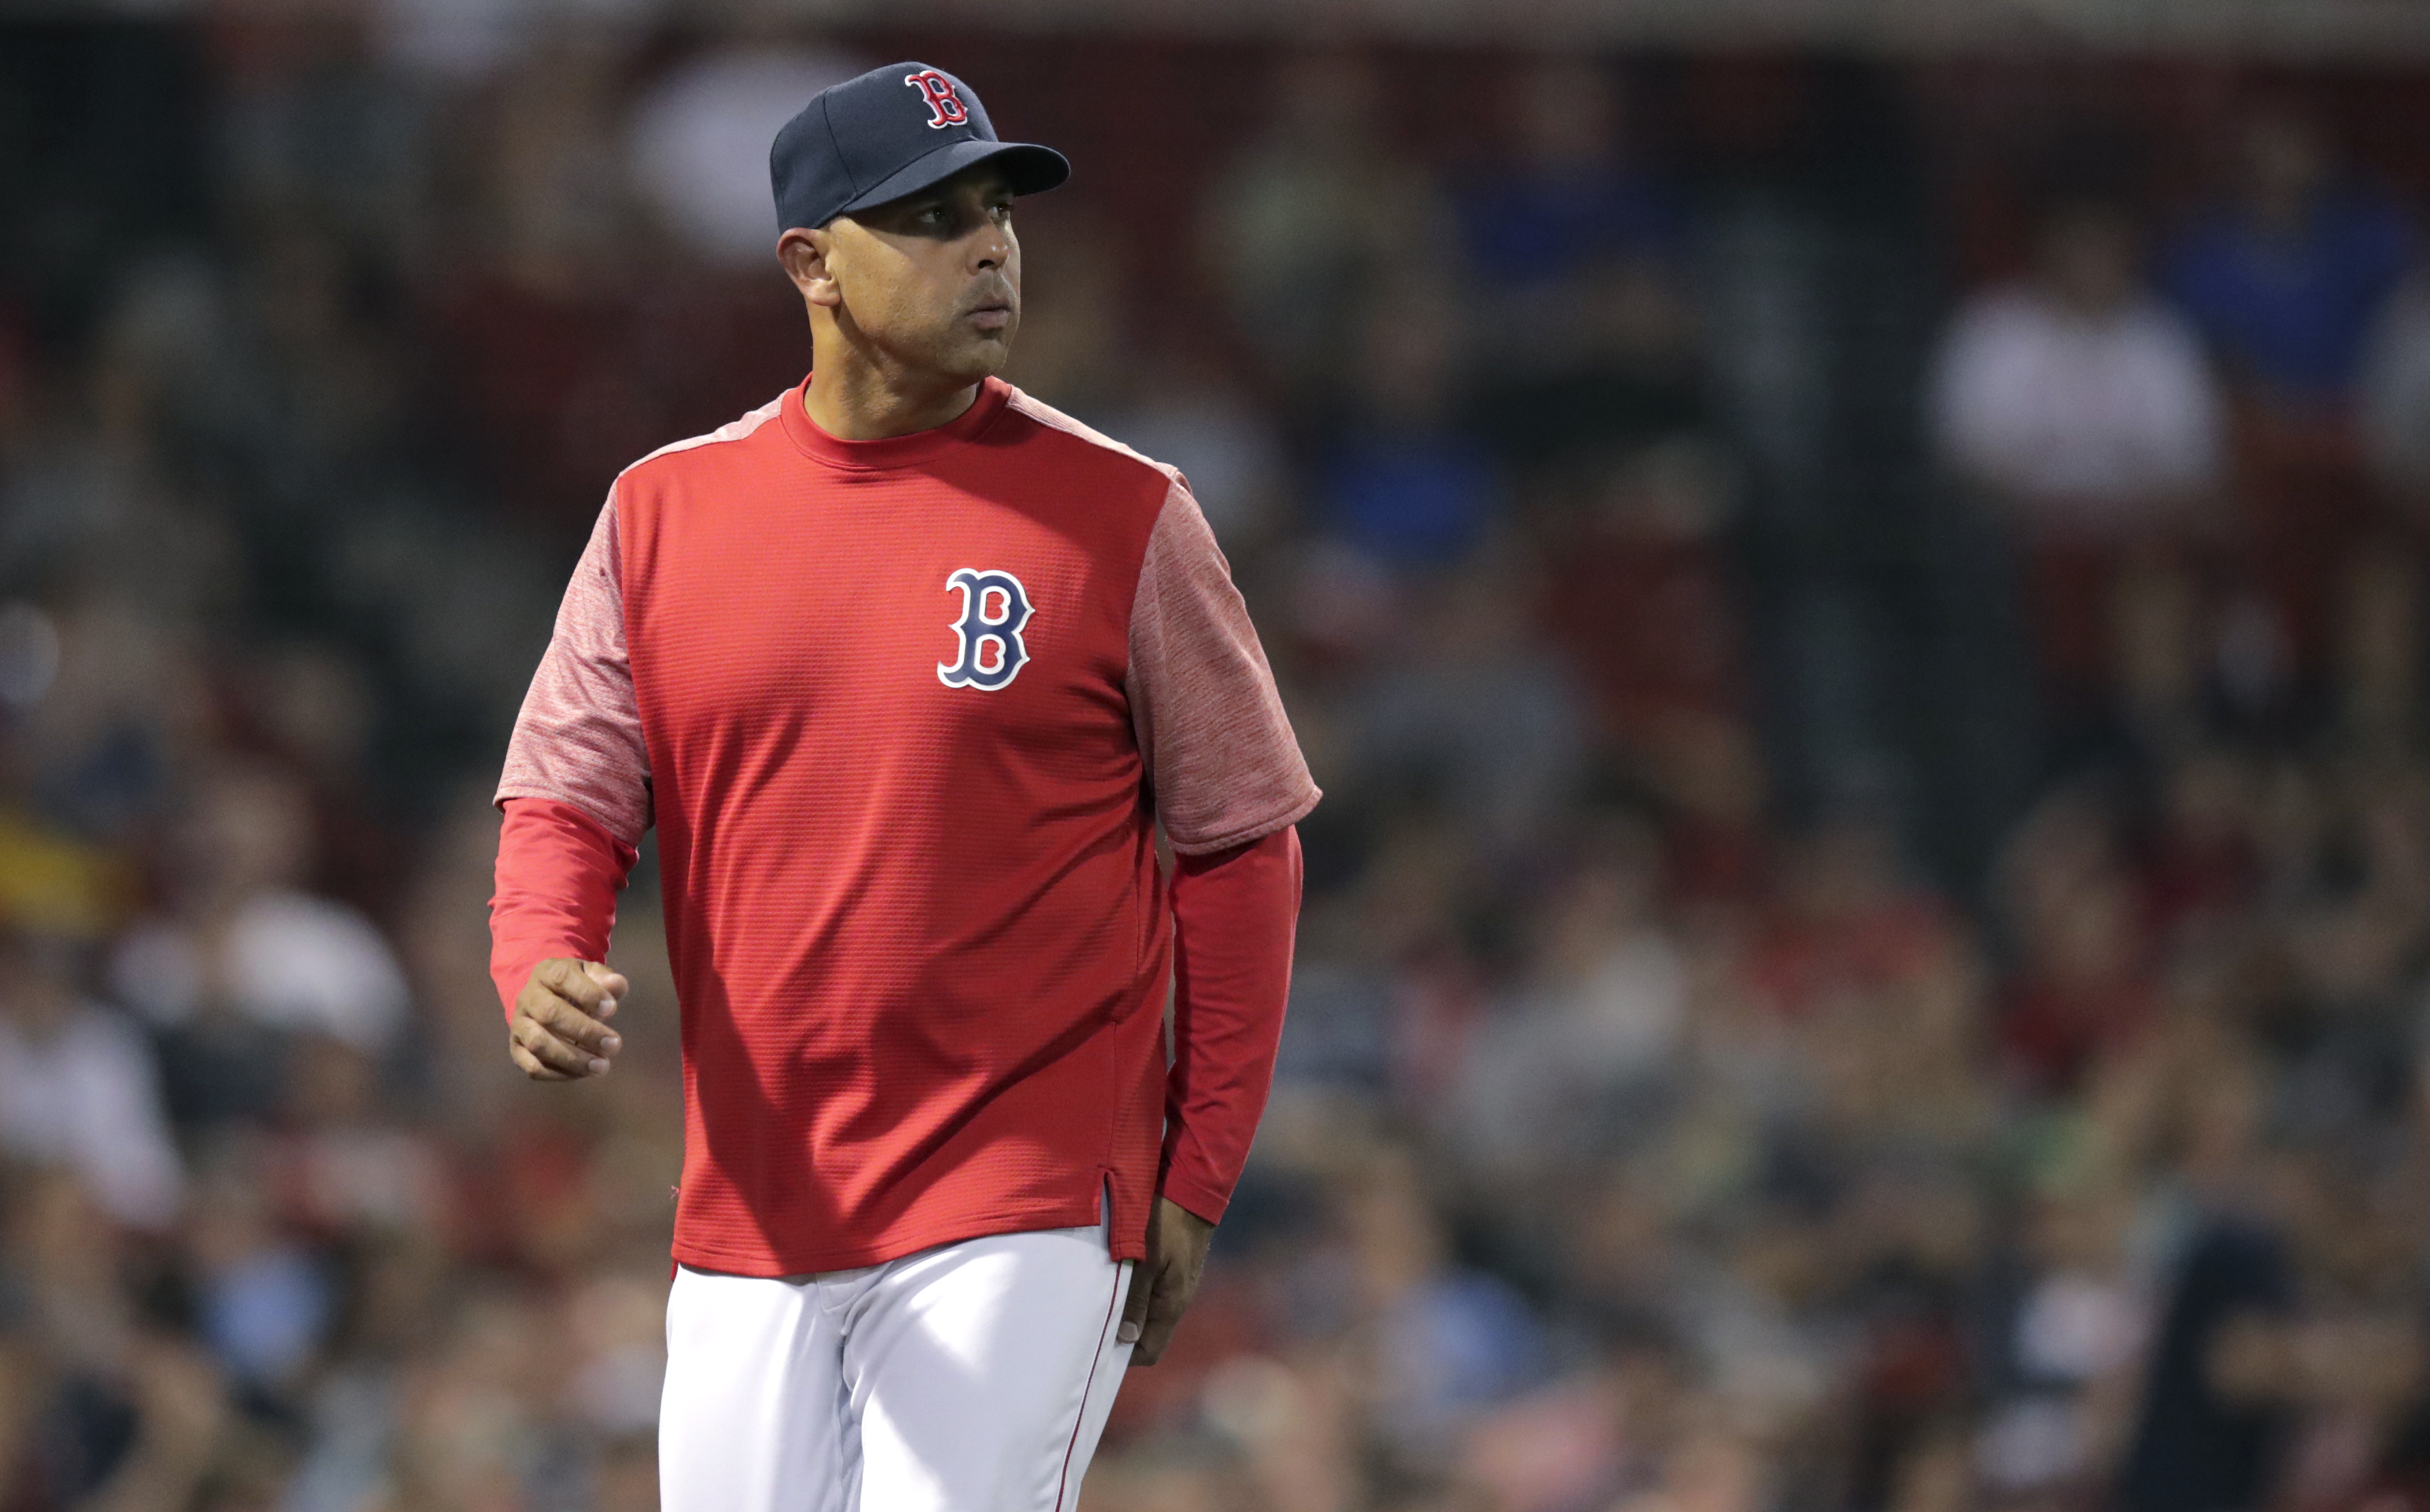 Alex Cora apologizes to Boston Red Sox, fans: 'This situation is